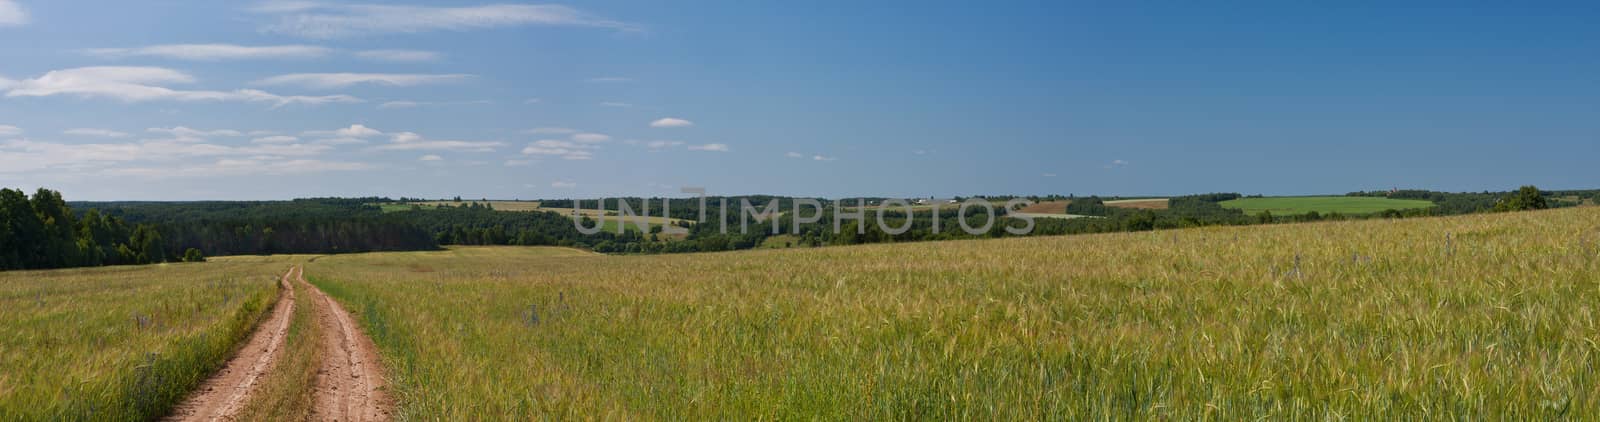 Panorama summer landscape with field and forest.